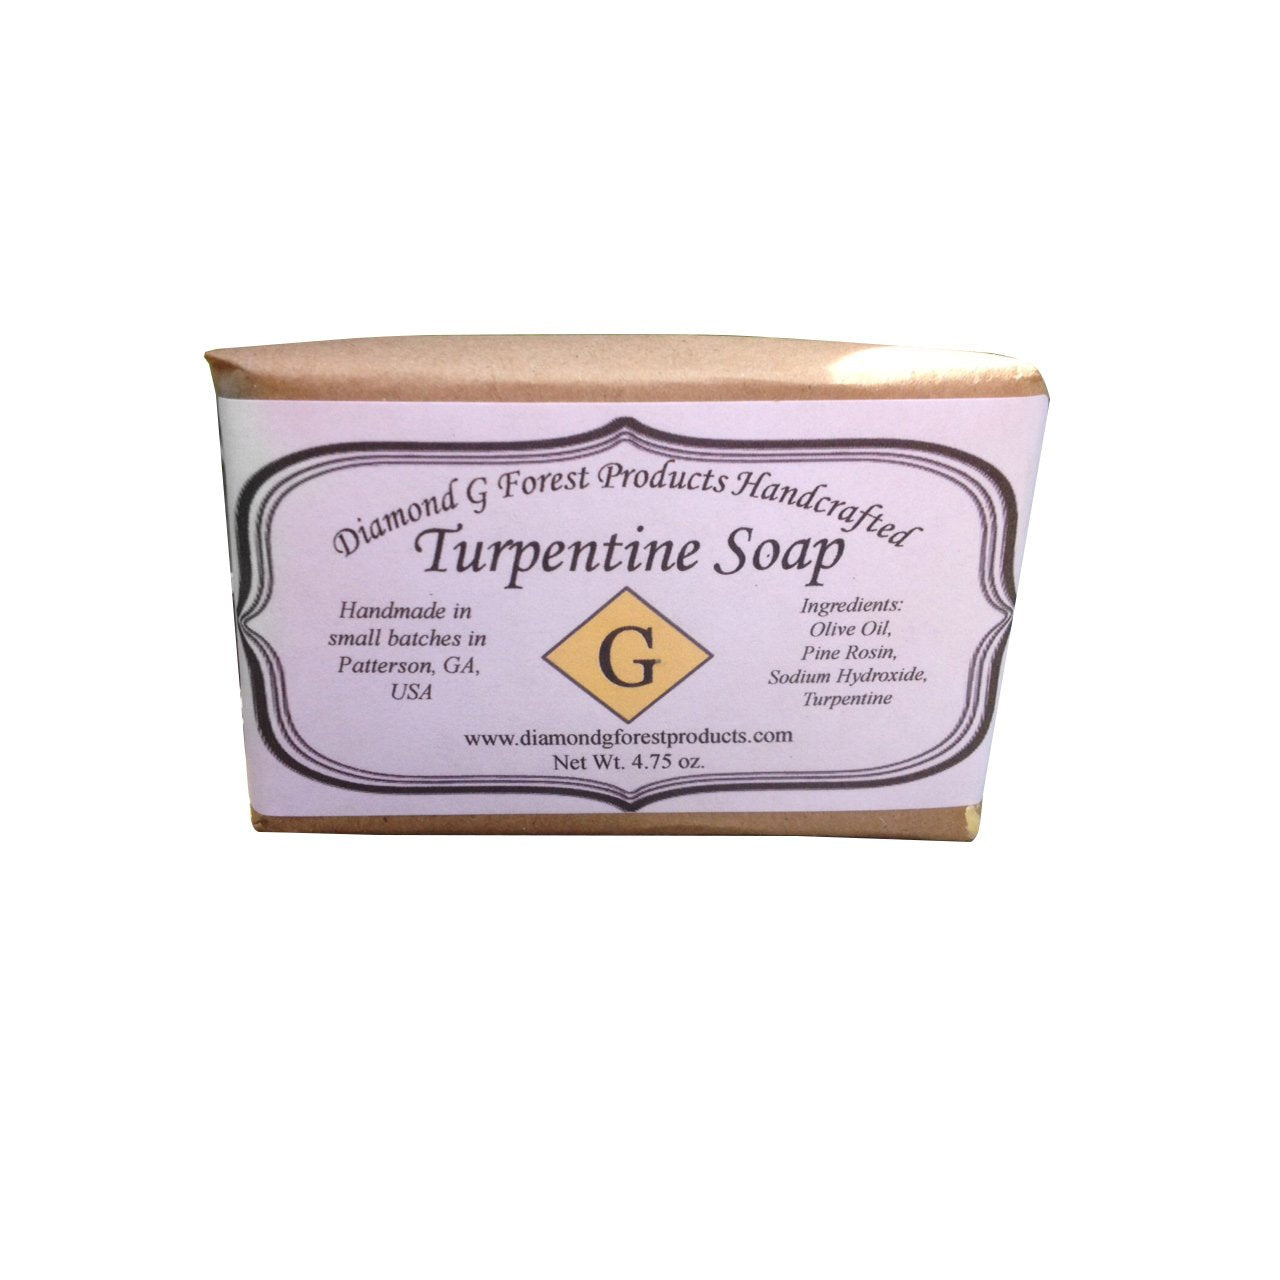 Diamond G Forest Products 100% Pure Gum Spirits of Turpentine